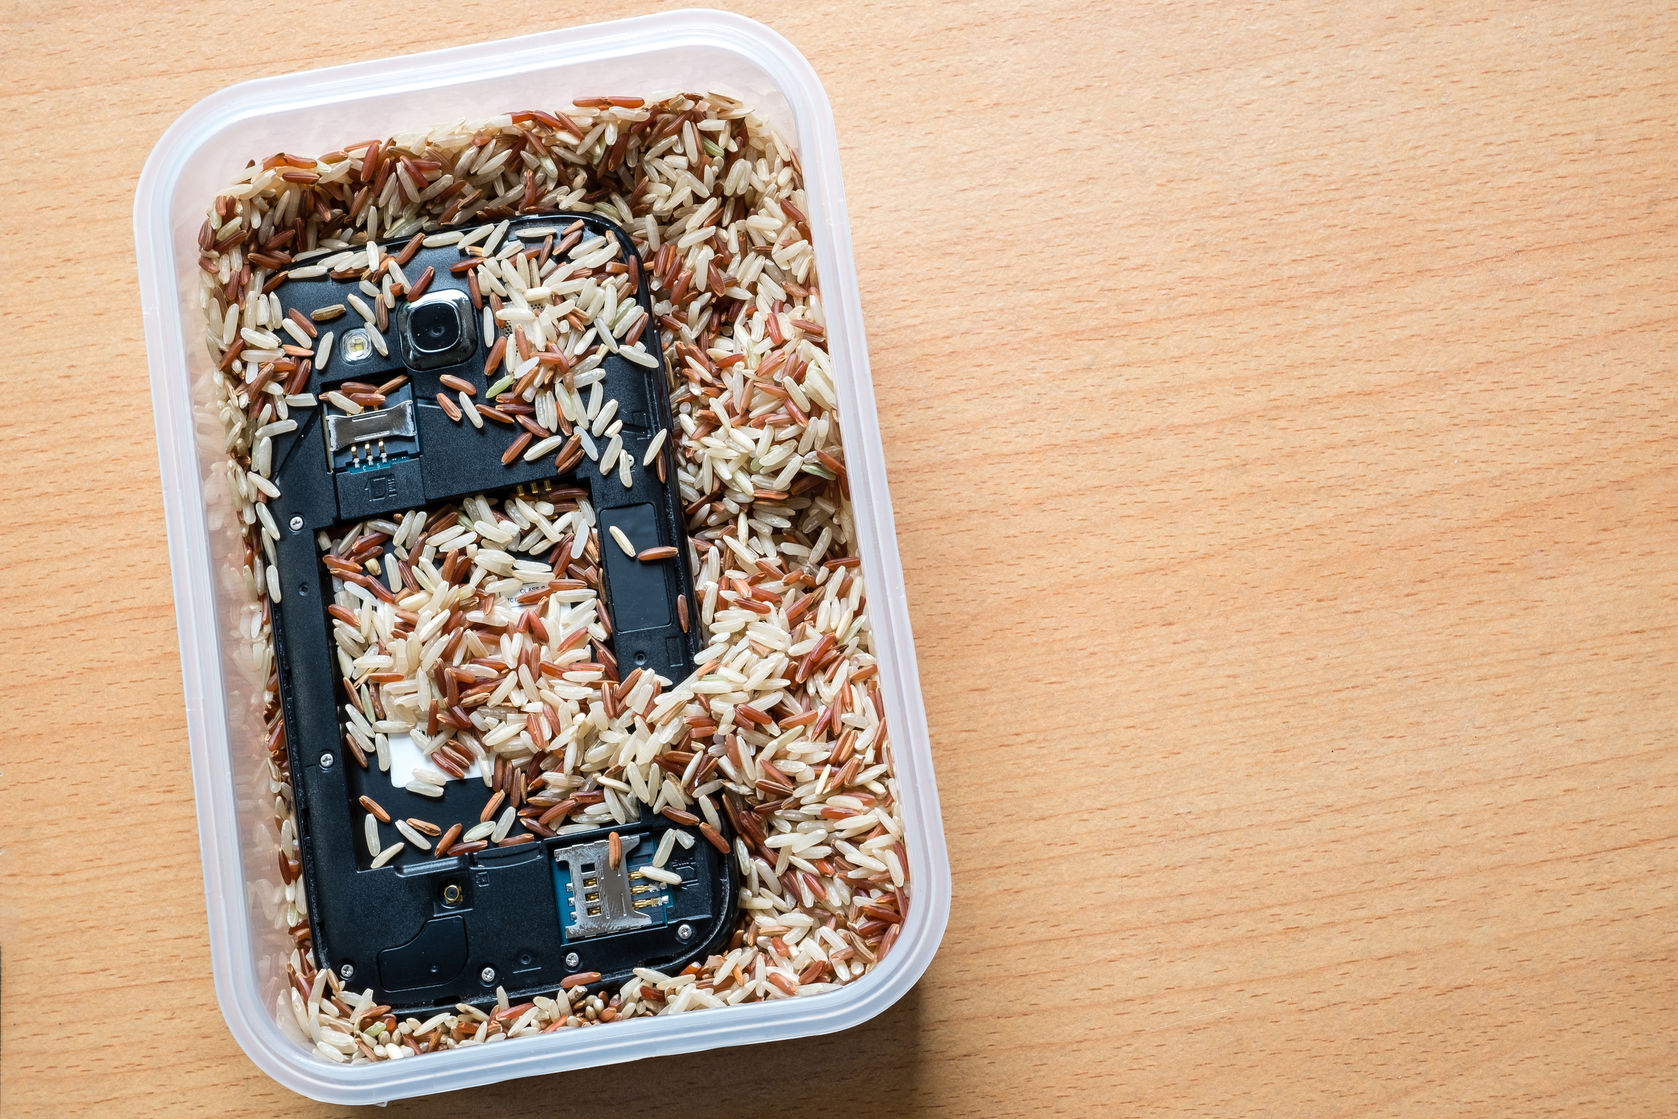 A smartphone immersed in rice.